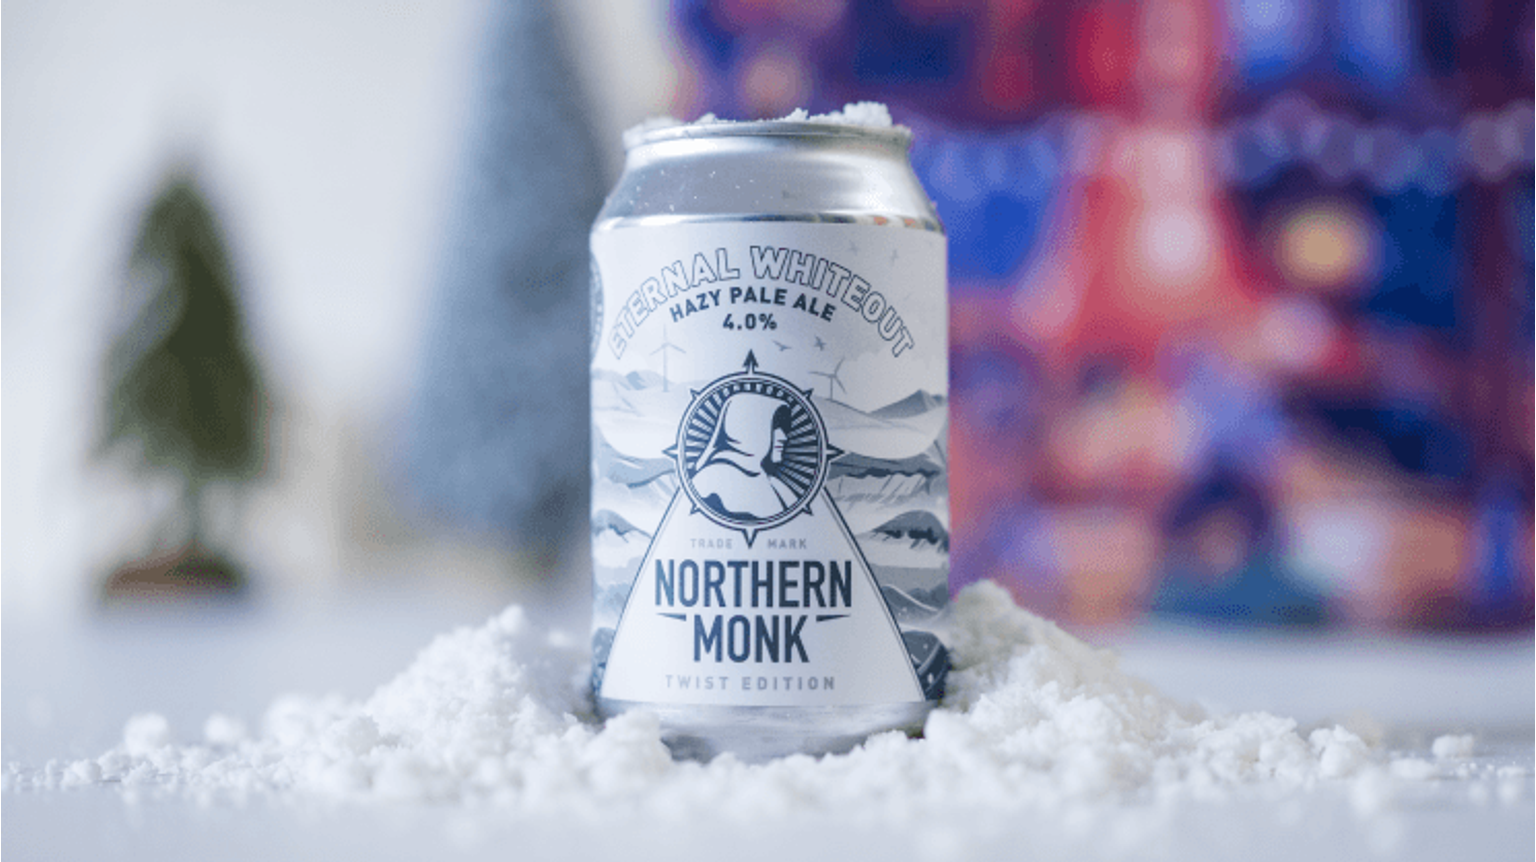 thumbnail for blog article named: Beery Christmas : Northern Monk Eternal Whiteout